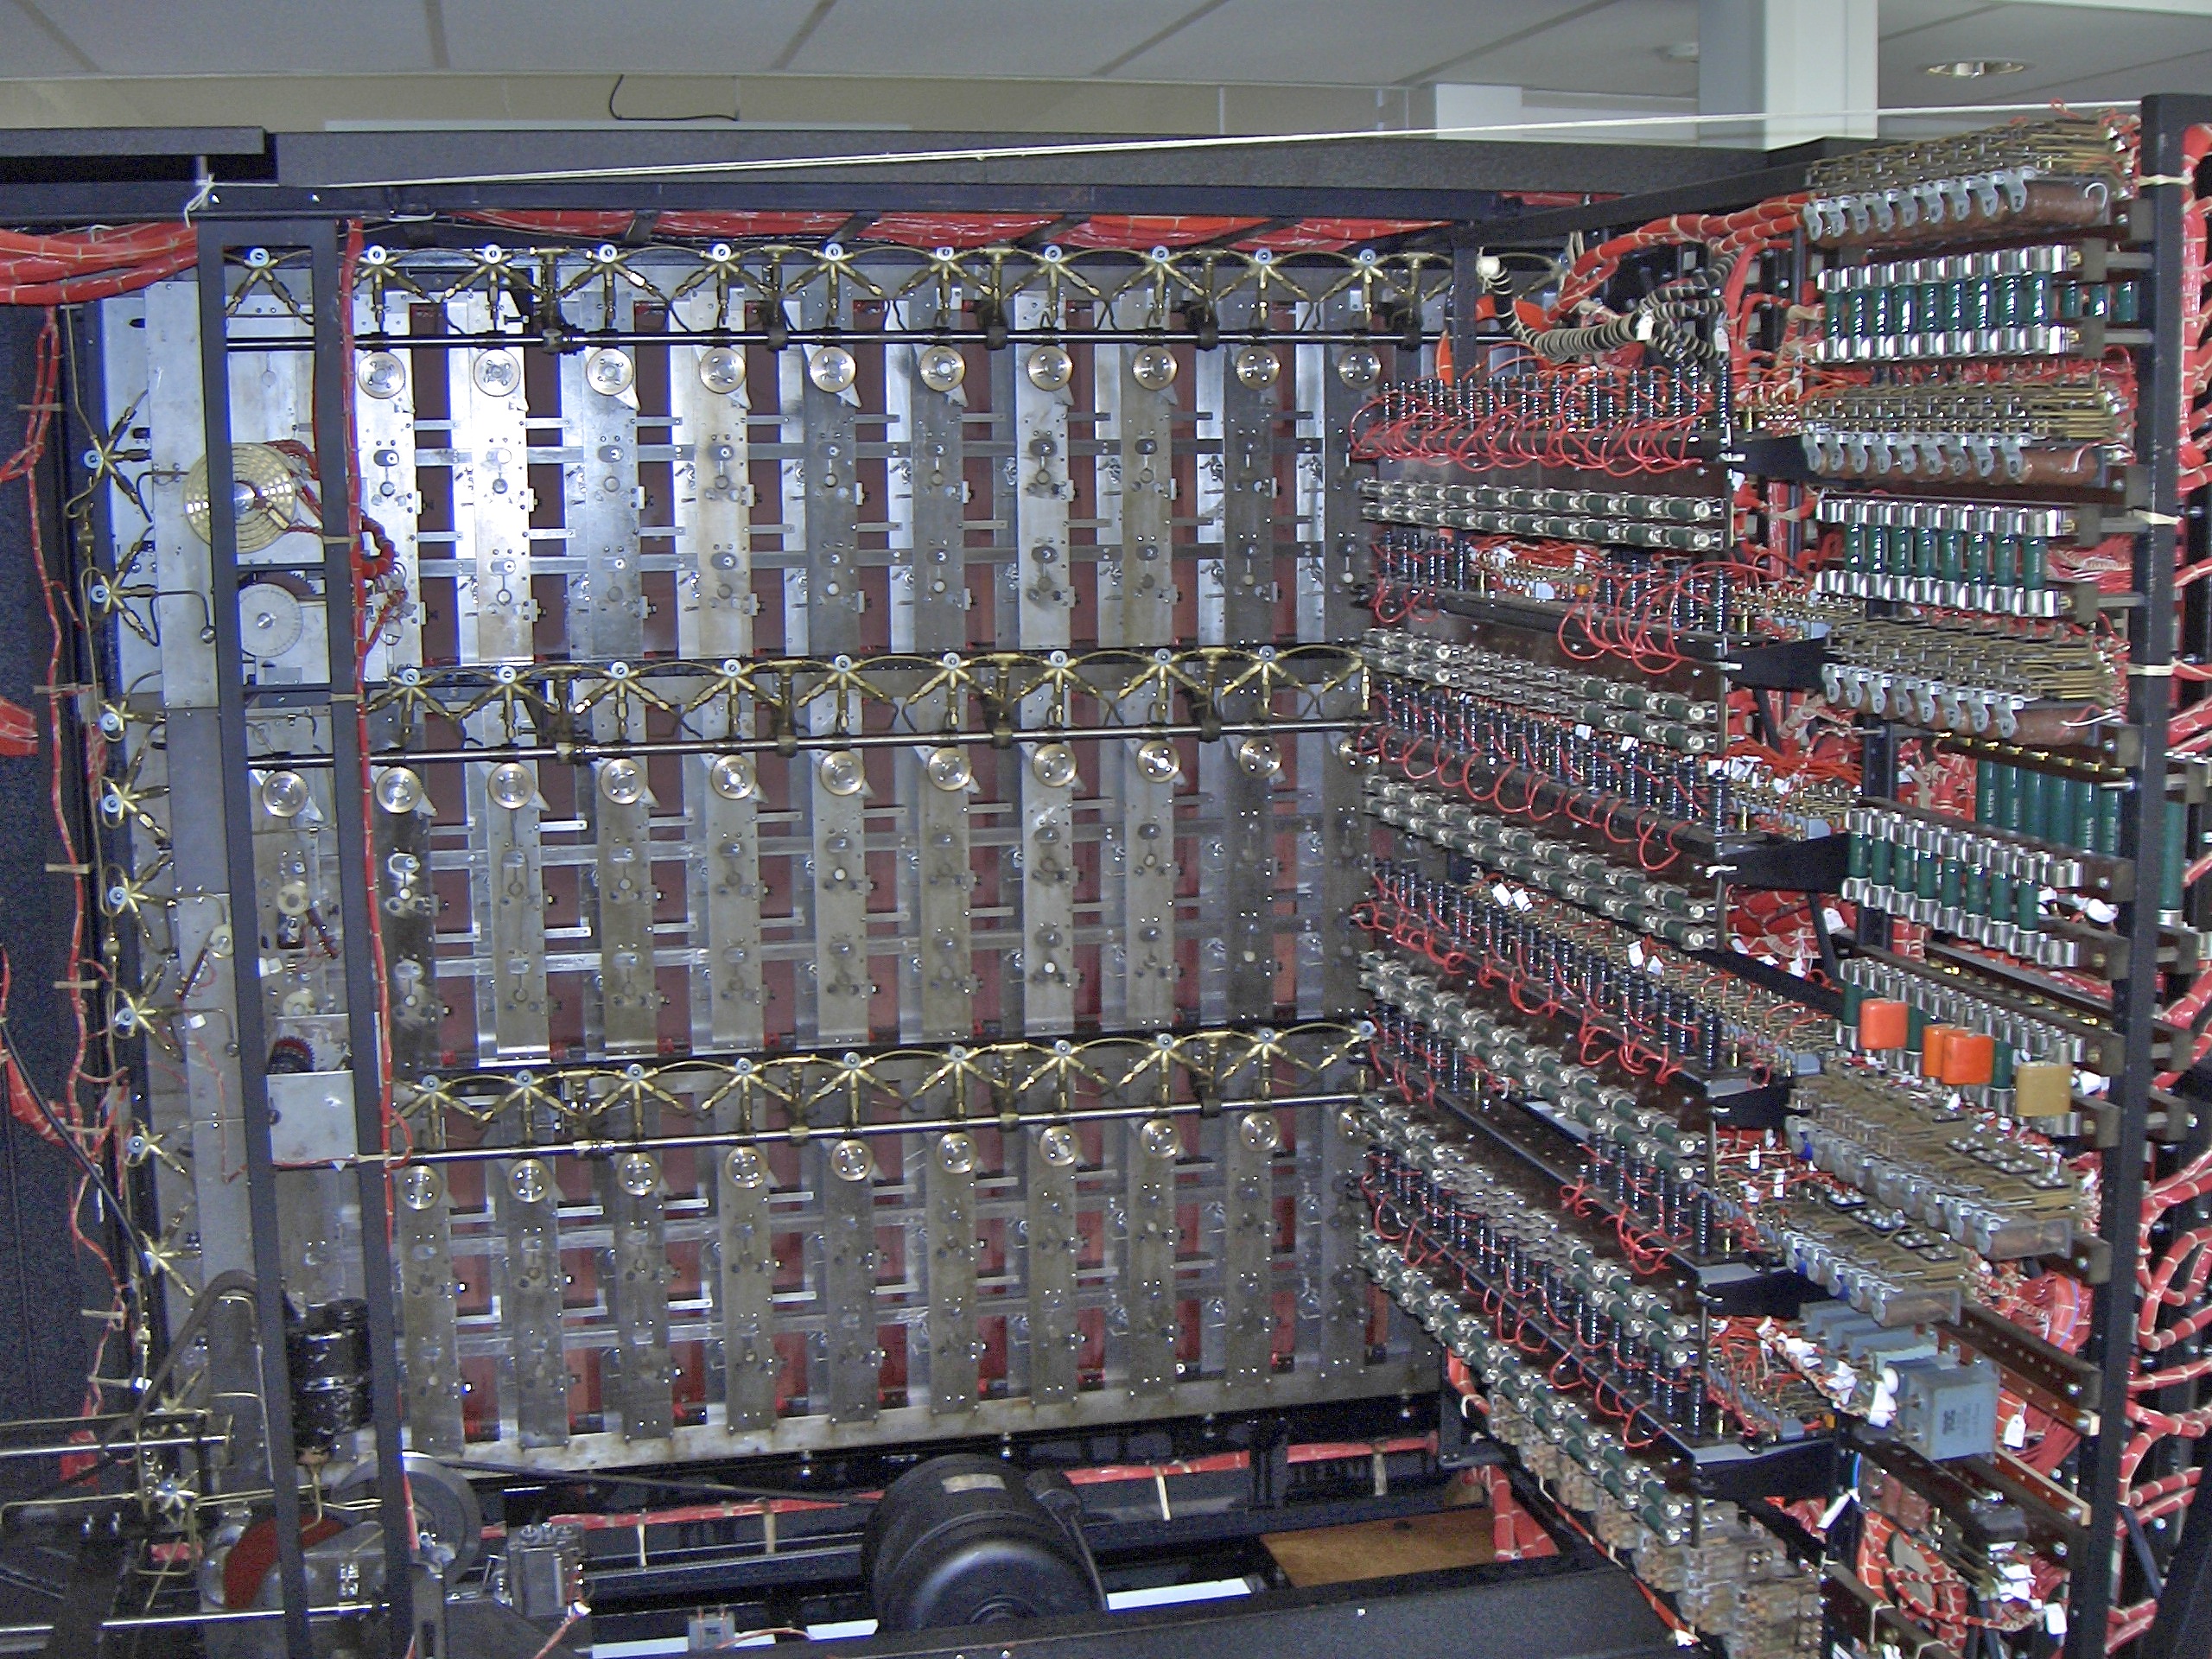 The Turing Bombe Rebuild Project